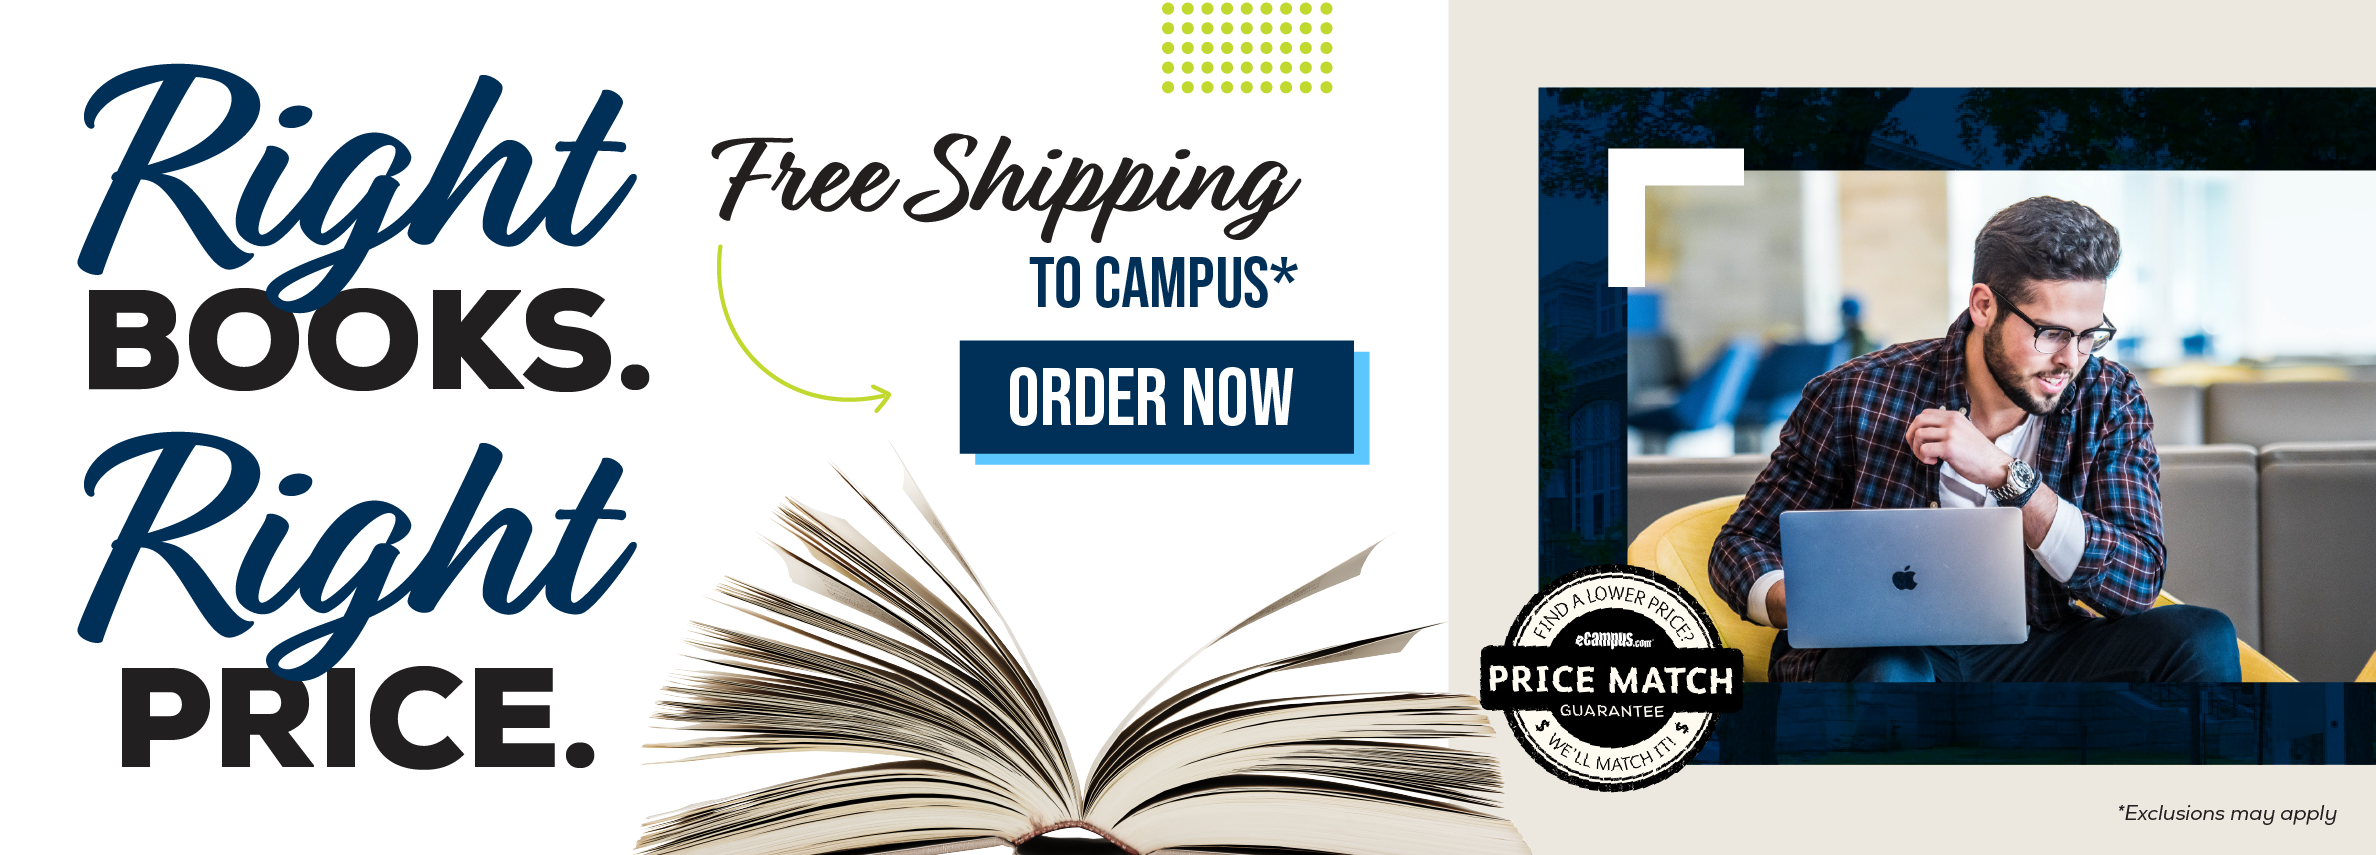 Right books. Right price. Free shipping to campus.* Order now. Price Match Guarantee. *Exclusions may apply.